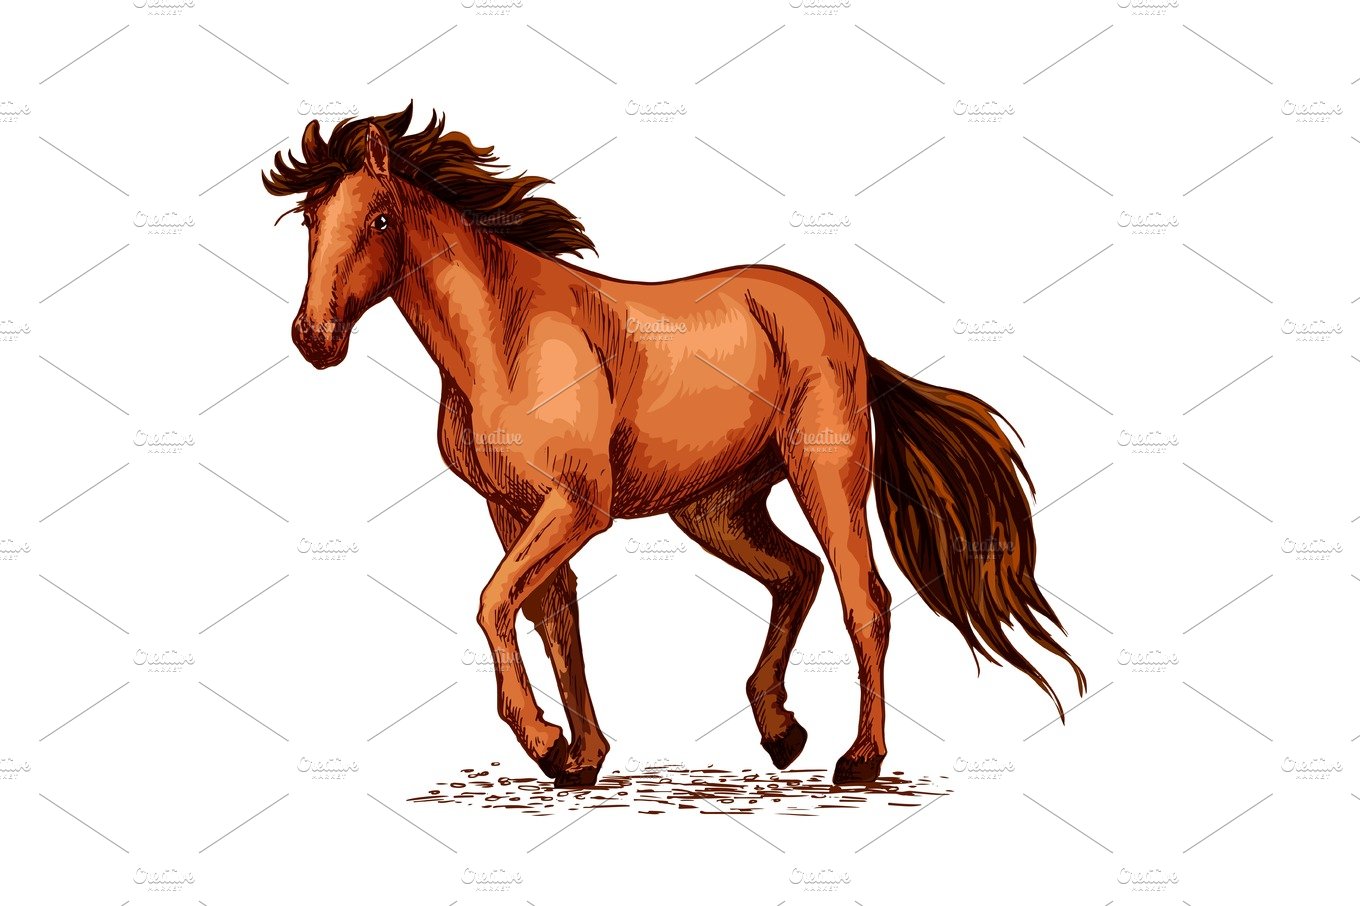 Horse sketch of brown mustang stallion cover image.